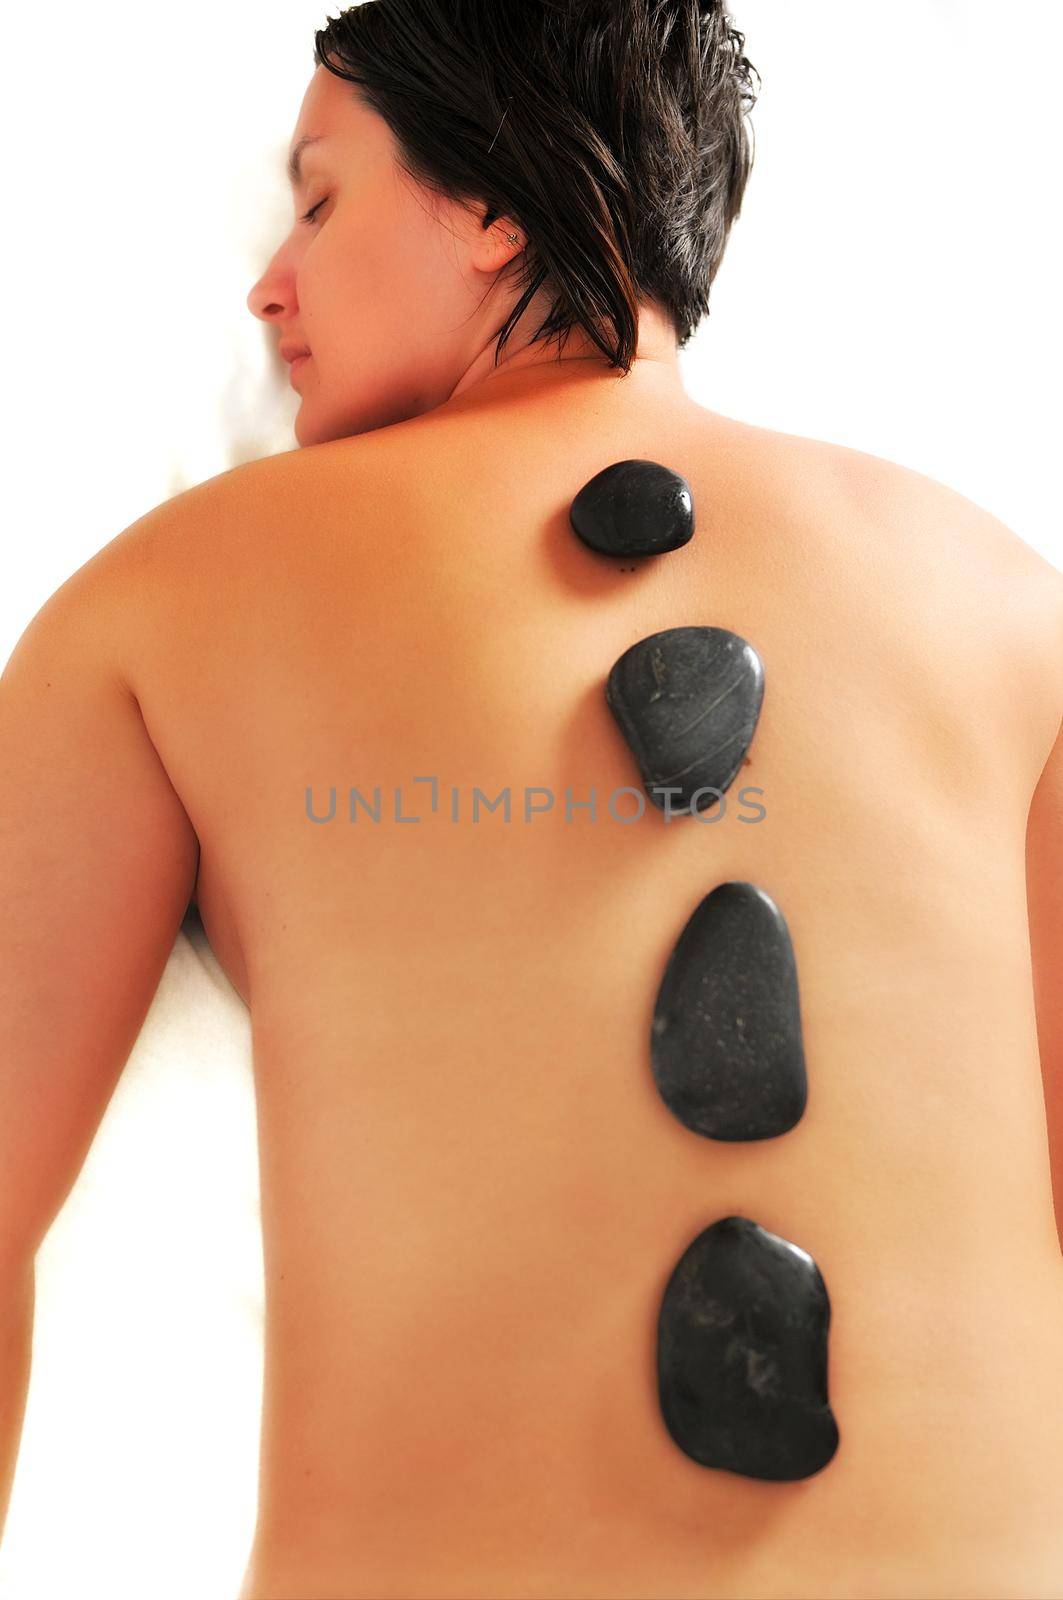 beautiful woman have hotstone massage at spa and wellness center